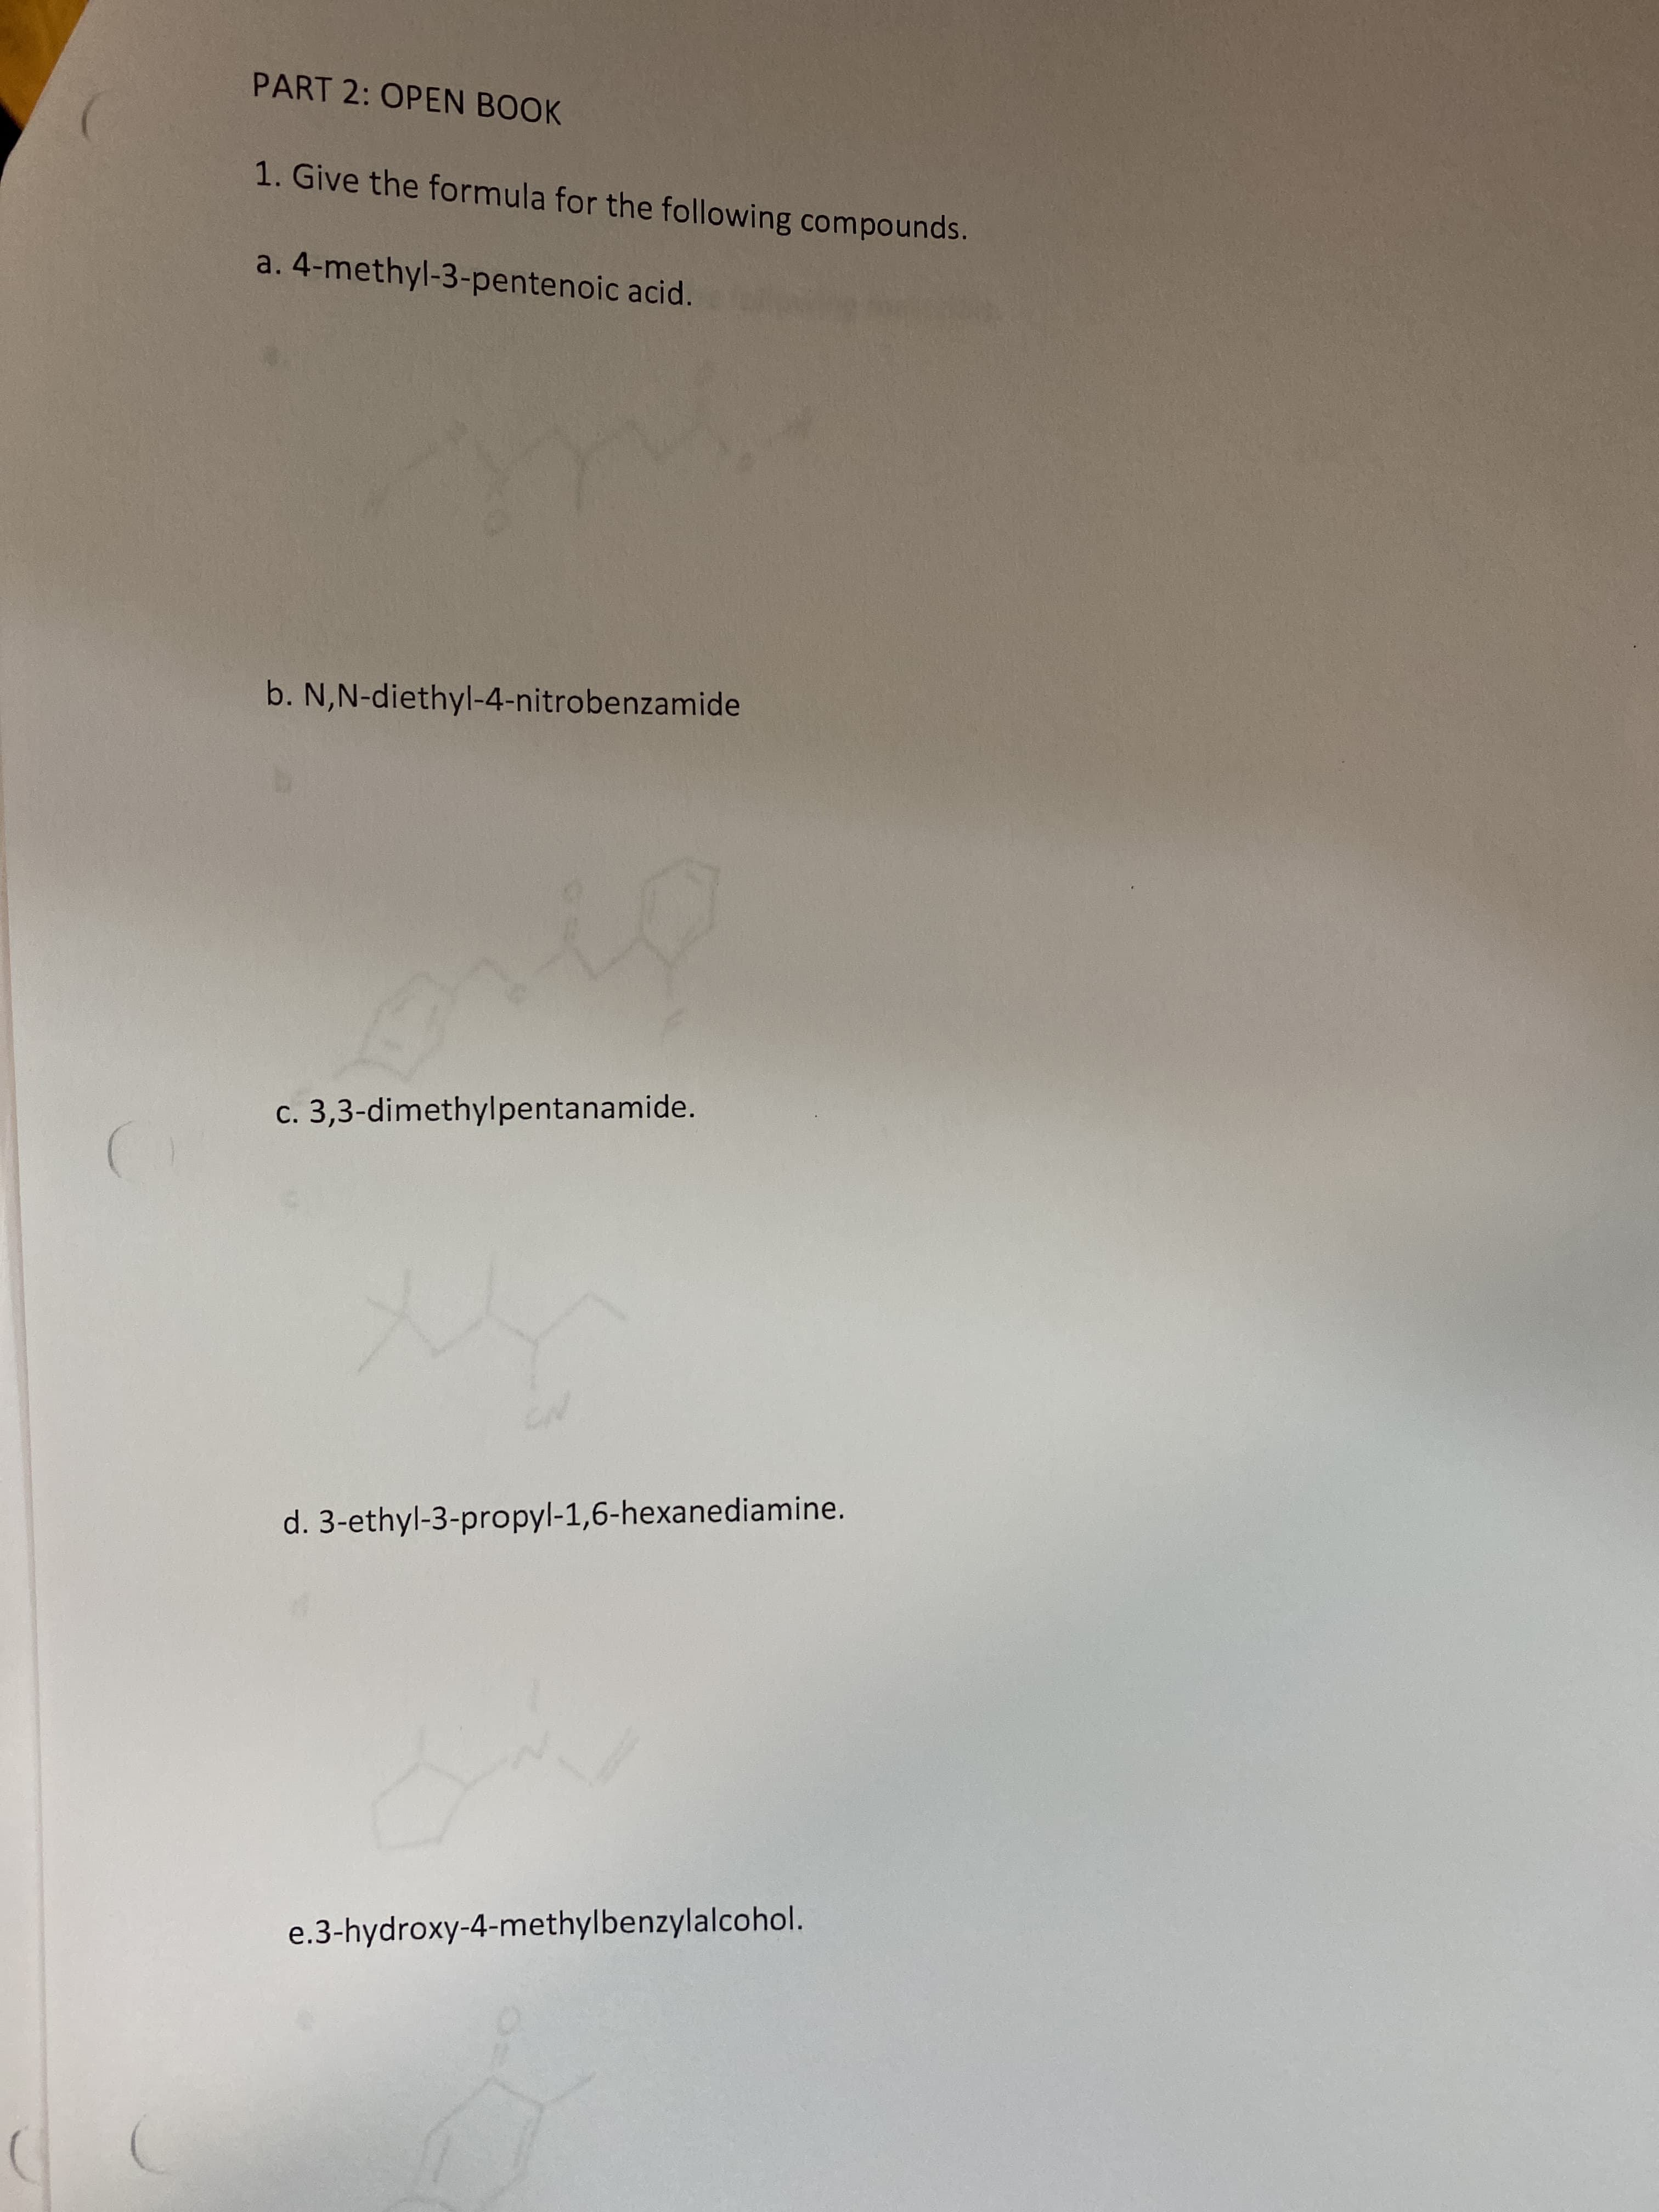 1. Give the formula for the following compounds.
a. 4-methyl-3-pentenoic acid.
b. N,N-diethyl-4-nitrobenzamide
c. 3,3-dimethylpentanamide.
